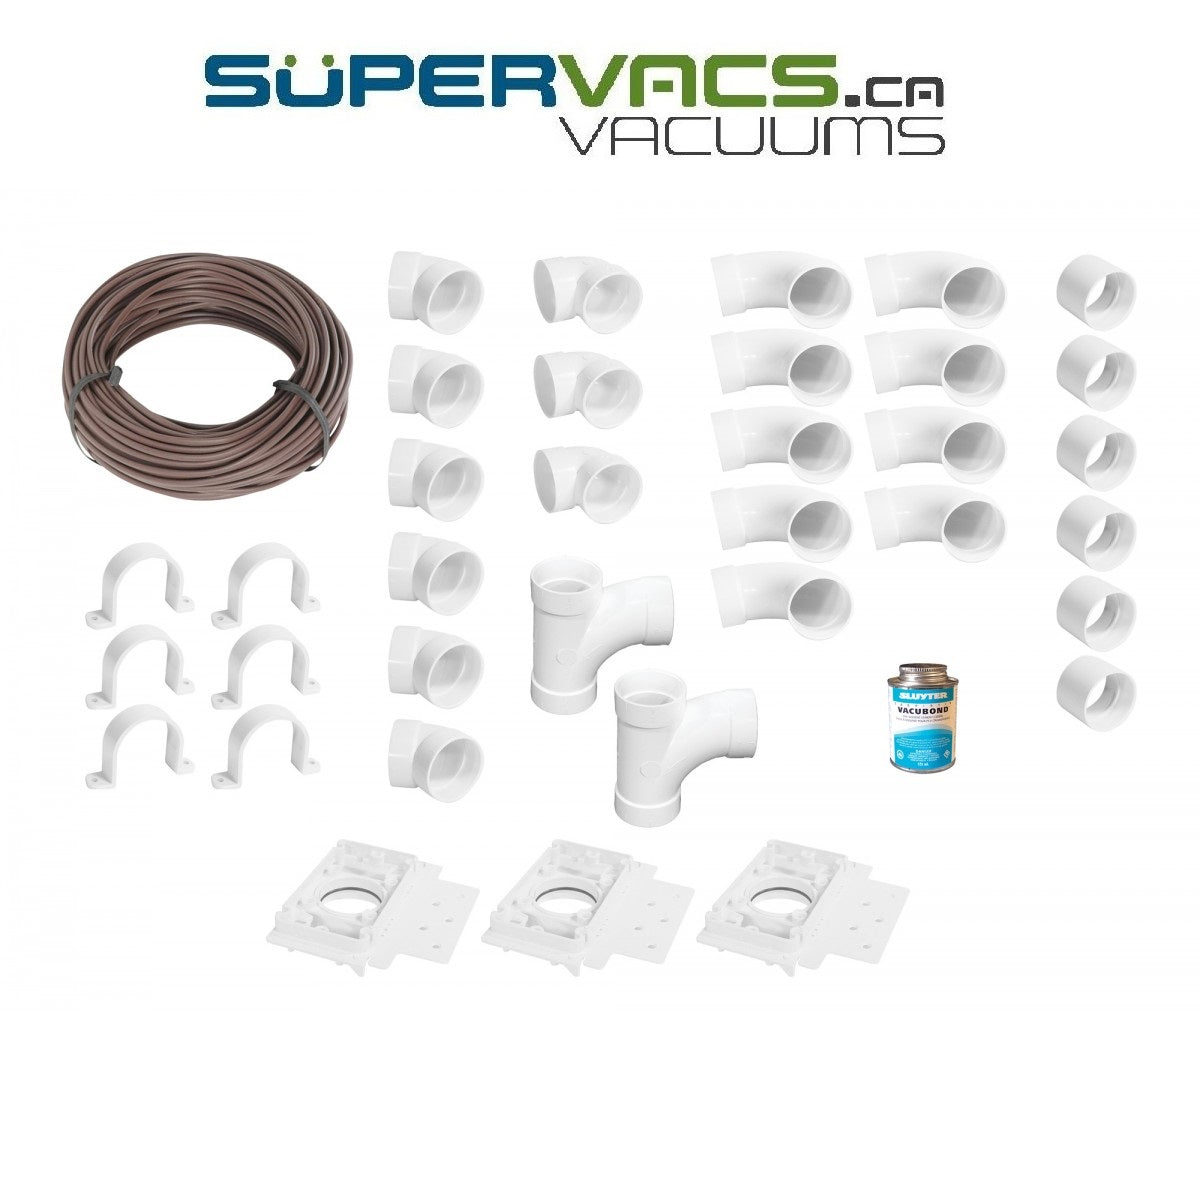 Installation Kit for Central Vacuum - 3 Inlets - with Accessories - Super Vacs